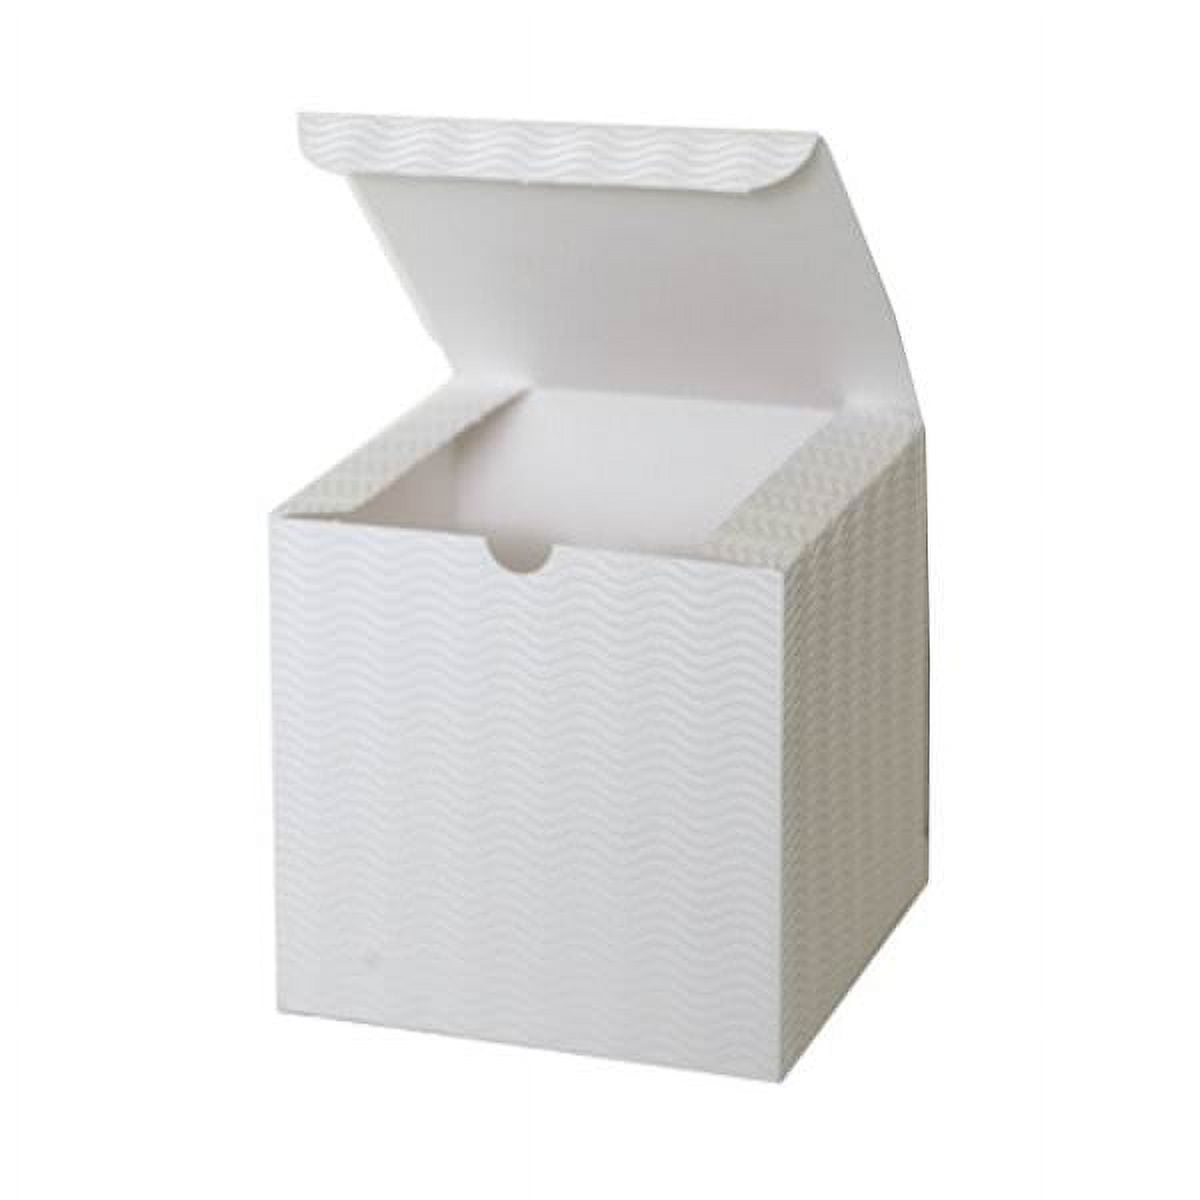 6x6x6 White Gloss Hi-Wall Folding Gift Boxes *Lids Sold Separately*